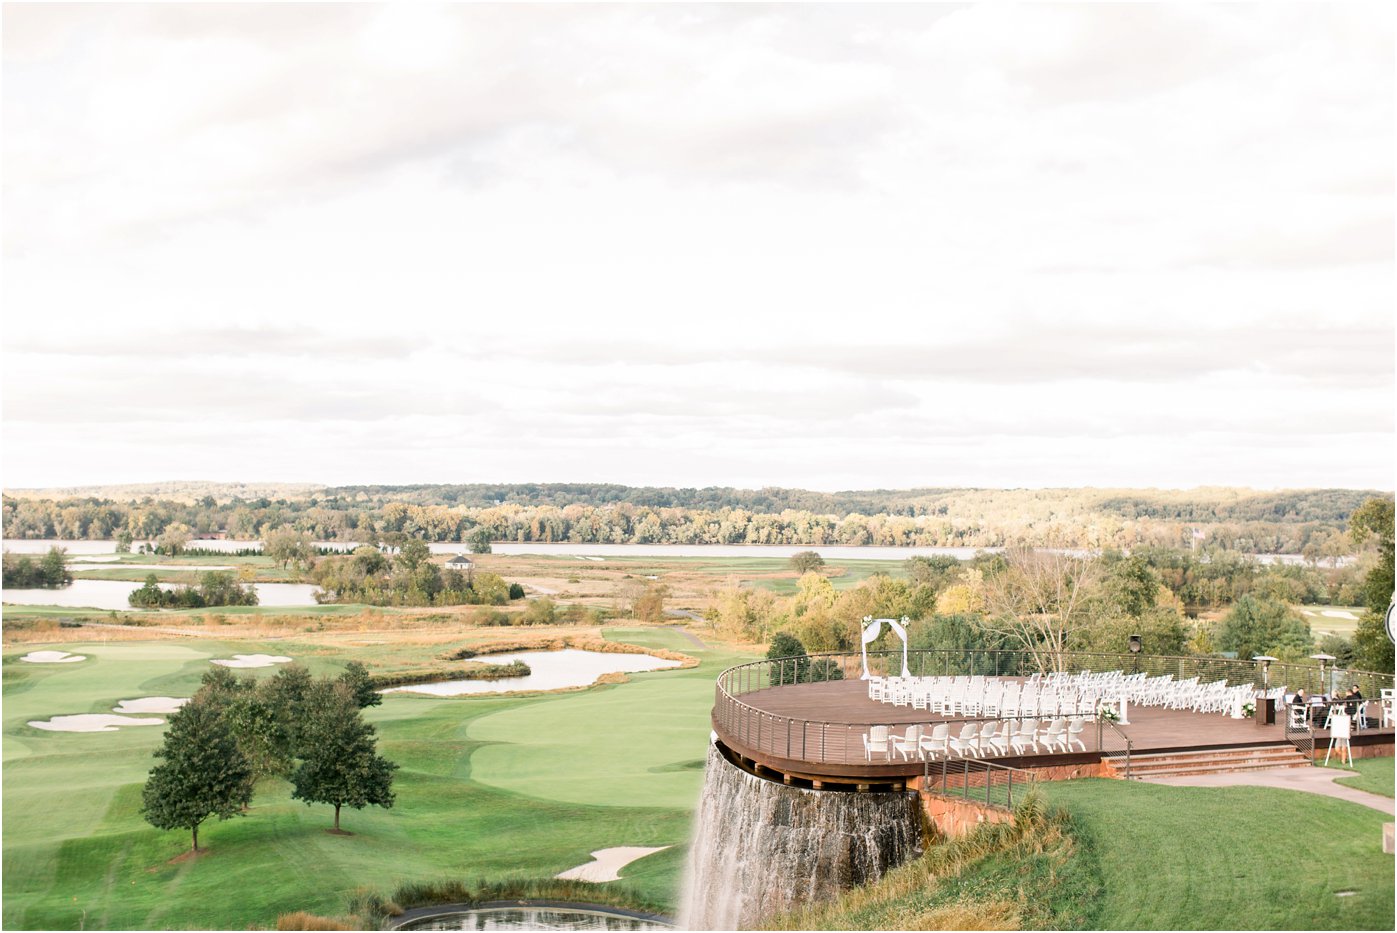 The views at Trump National Golf Club are incredible and the perfect place for a wedding ceremony. The ceremony space overlooks the entire golf course and into Leesburg, VA.